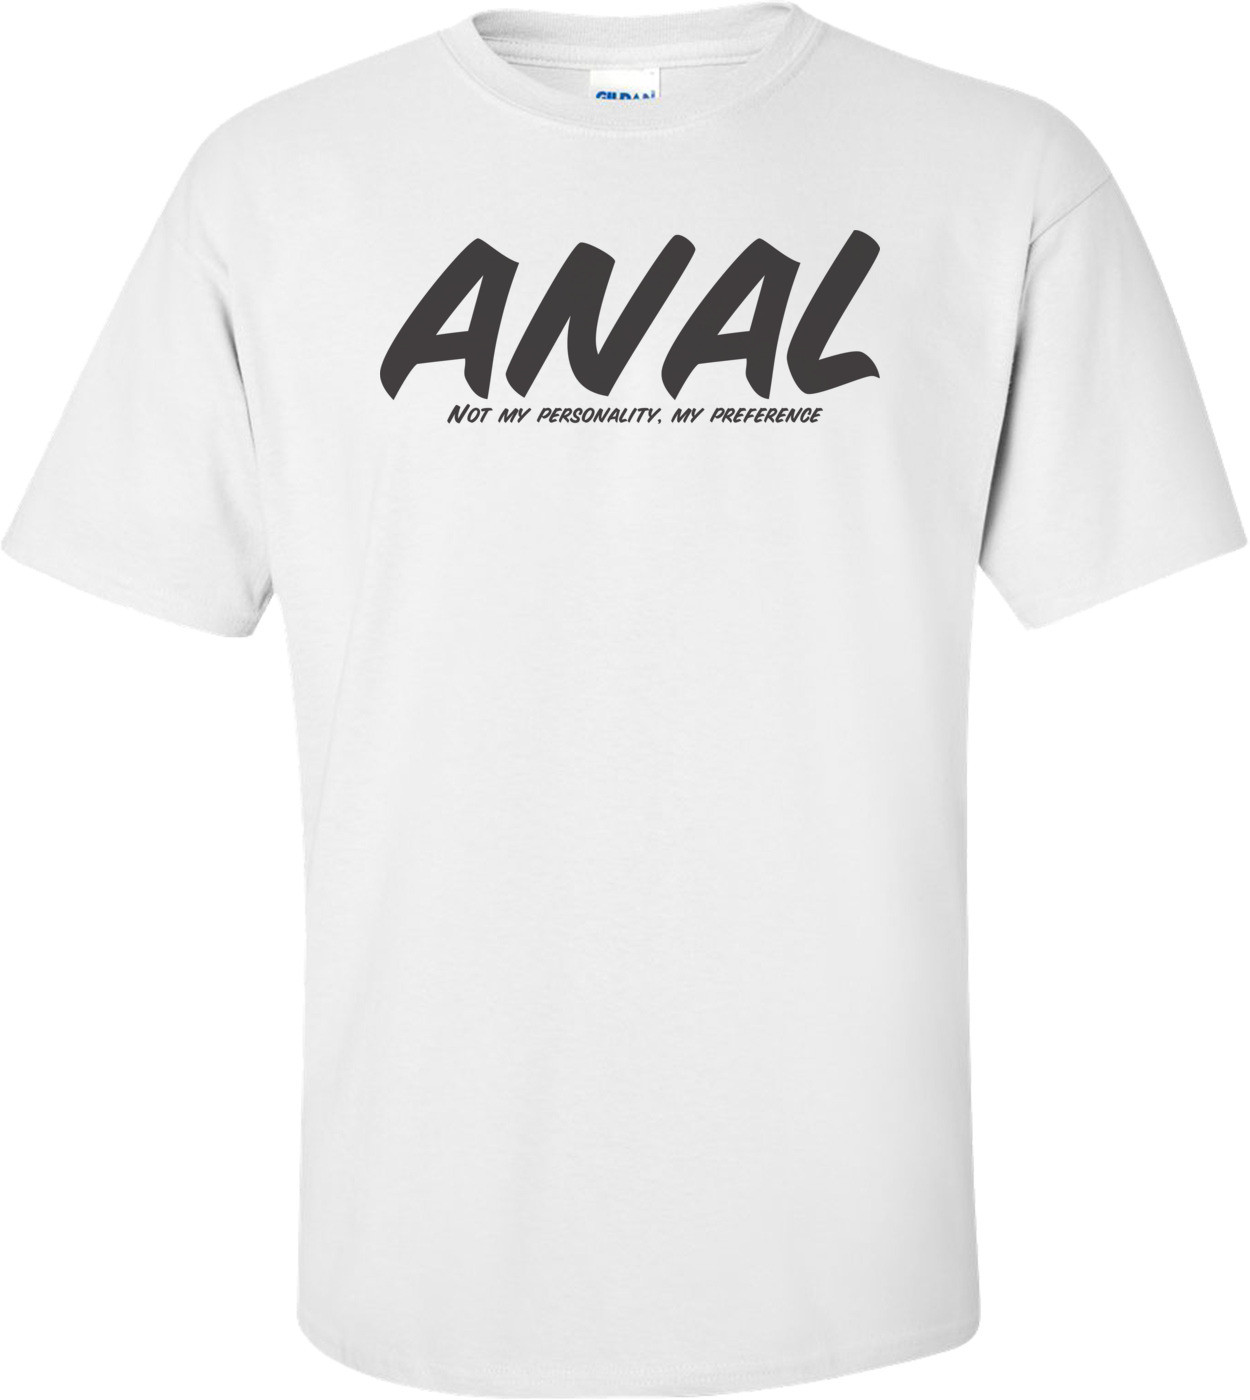 Anal Not My Personality, My Preference T-shirt